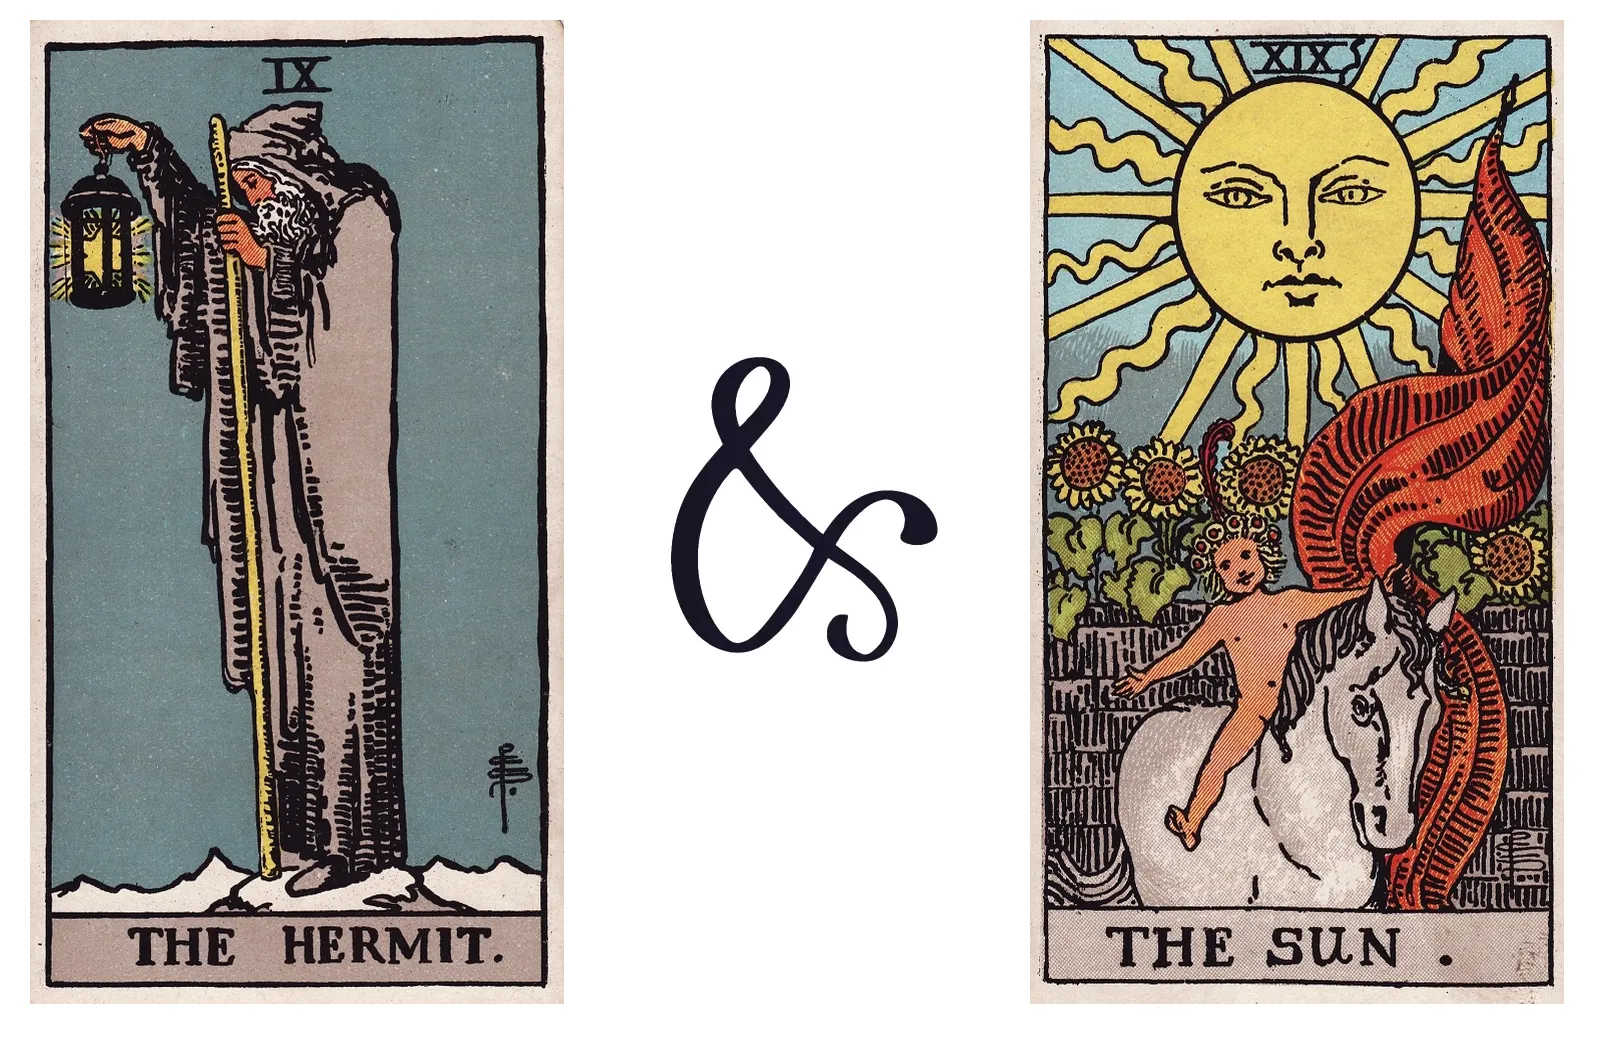 The Hermit and The Sun